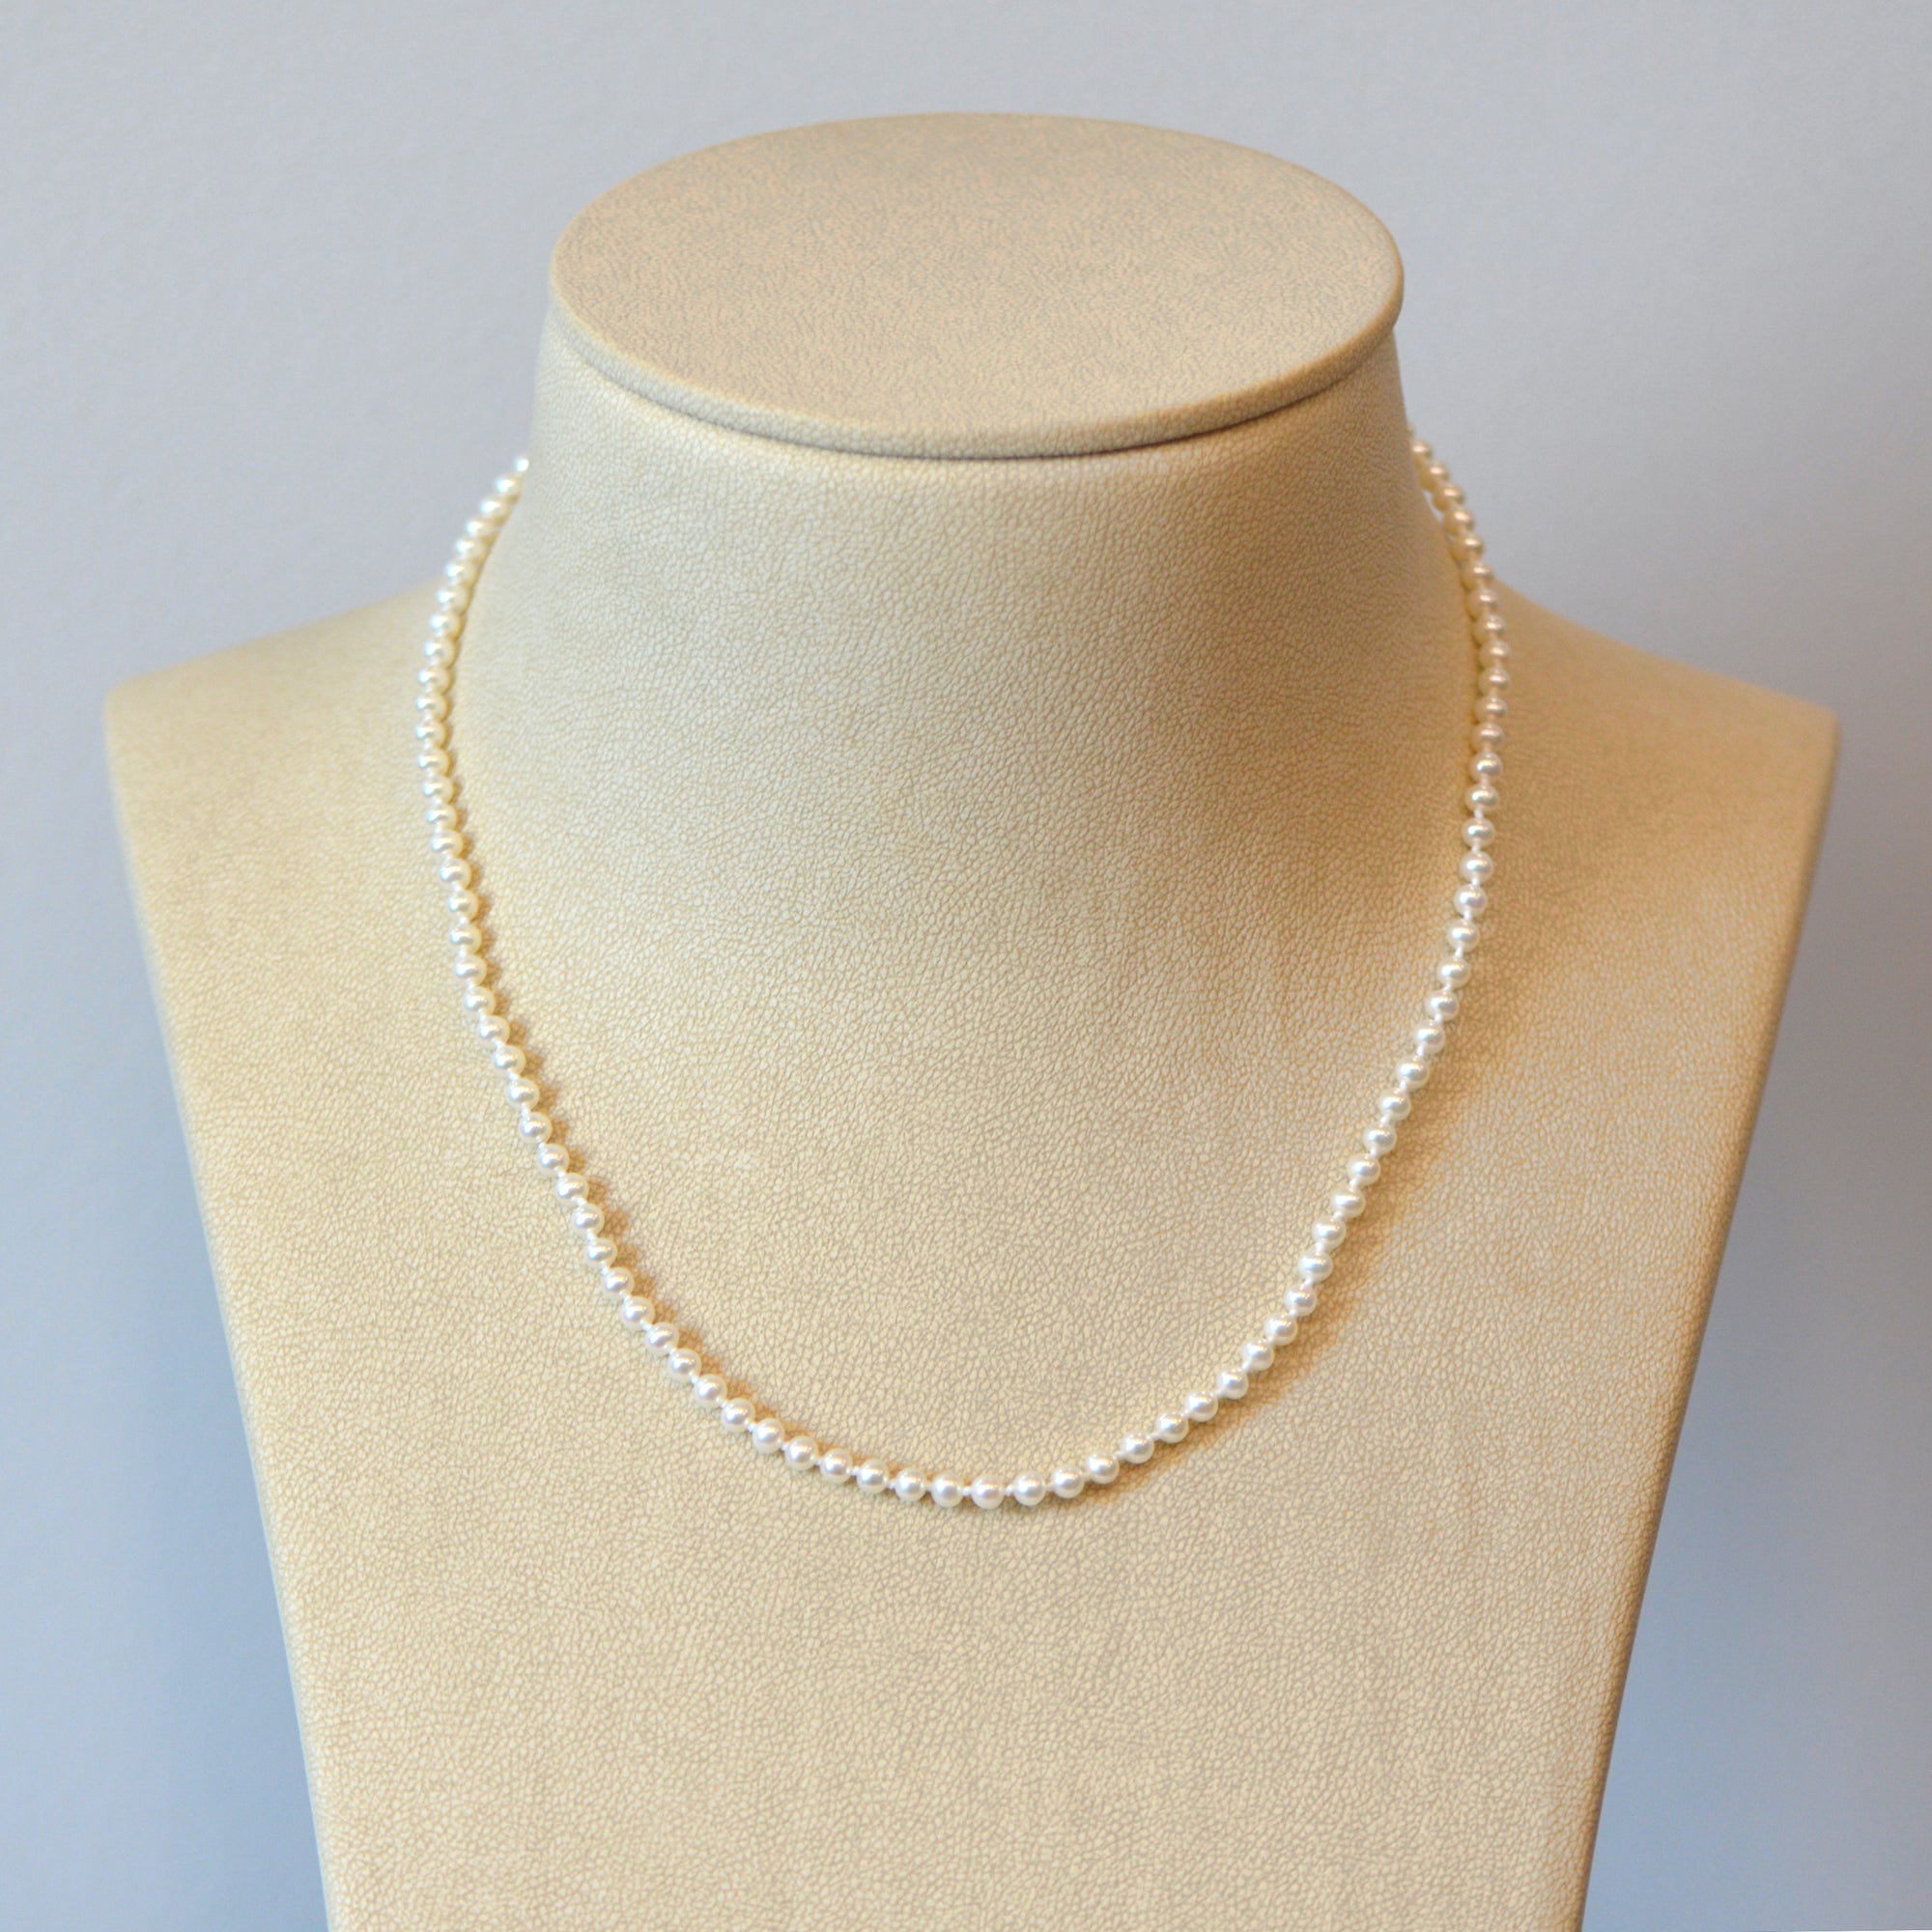 Pearl strand necklace featuring round freshwater pearls (4mm) and a 14K white gold marquis-shaped clasp. 